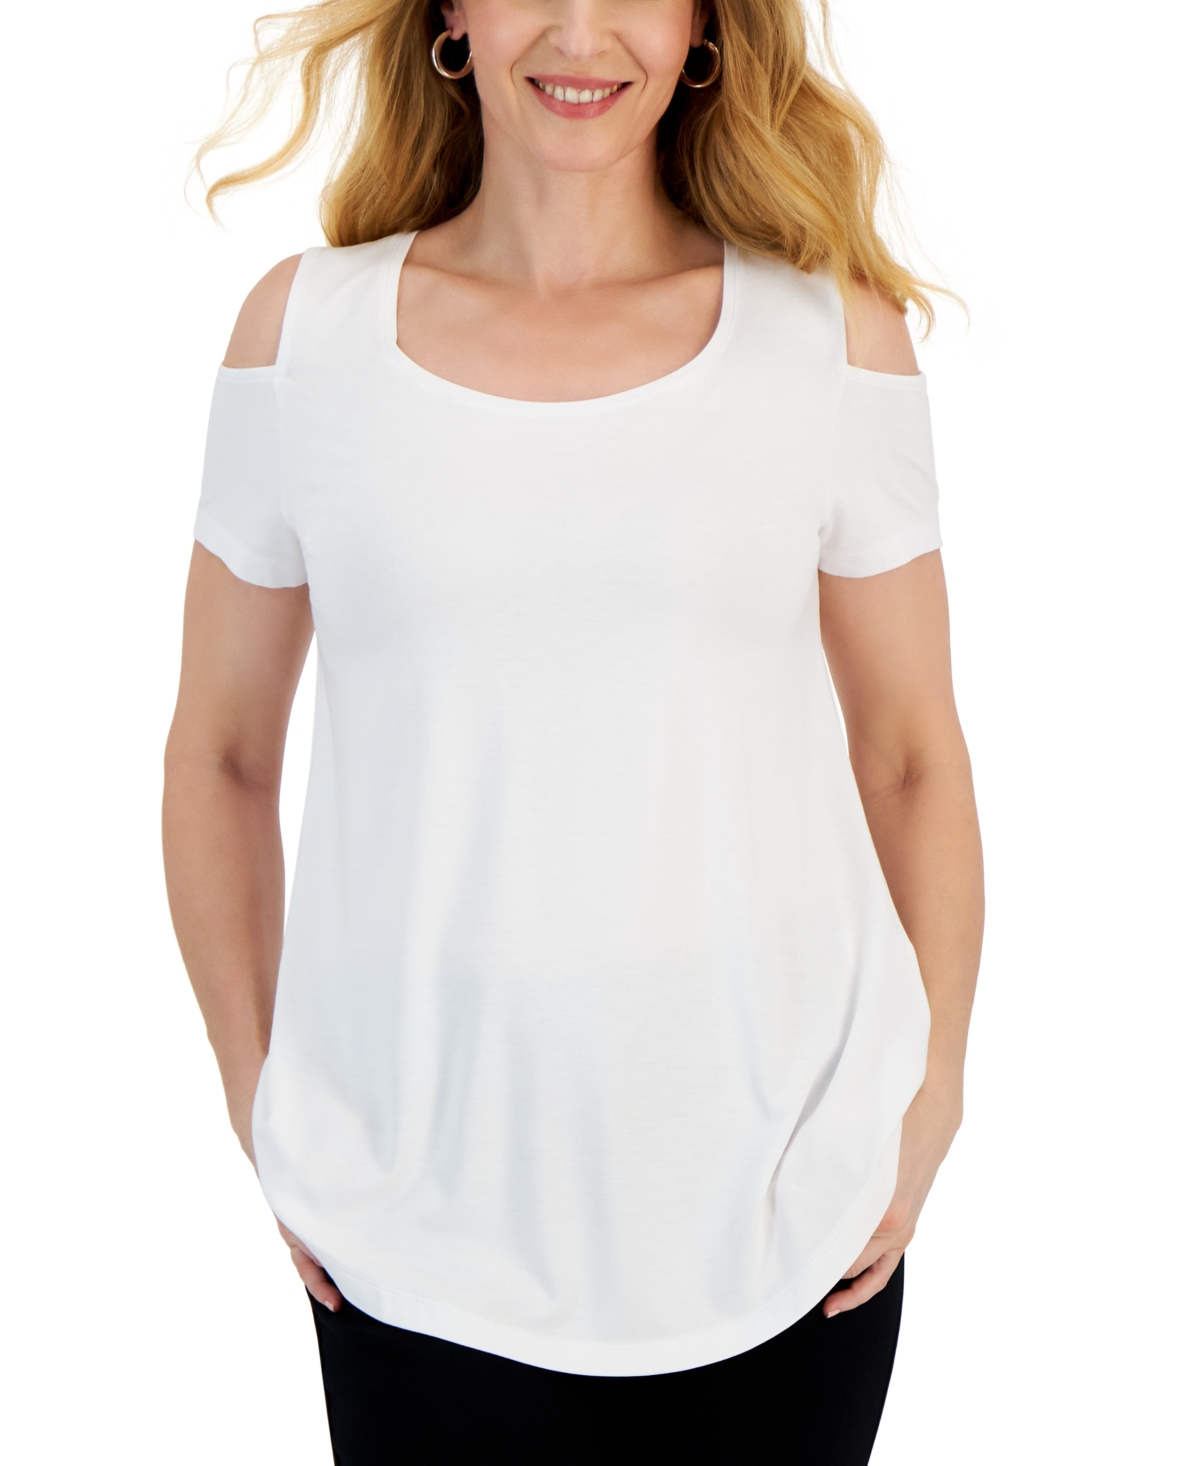 Women's Short Sleeve Scoop-Neck Cold-Shoulder Top, Created for Macy's - Phlox Pink